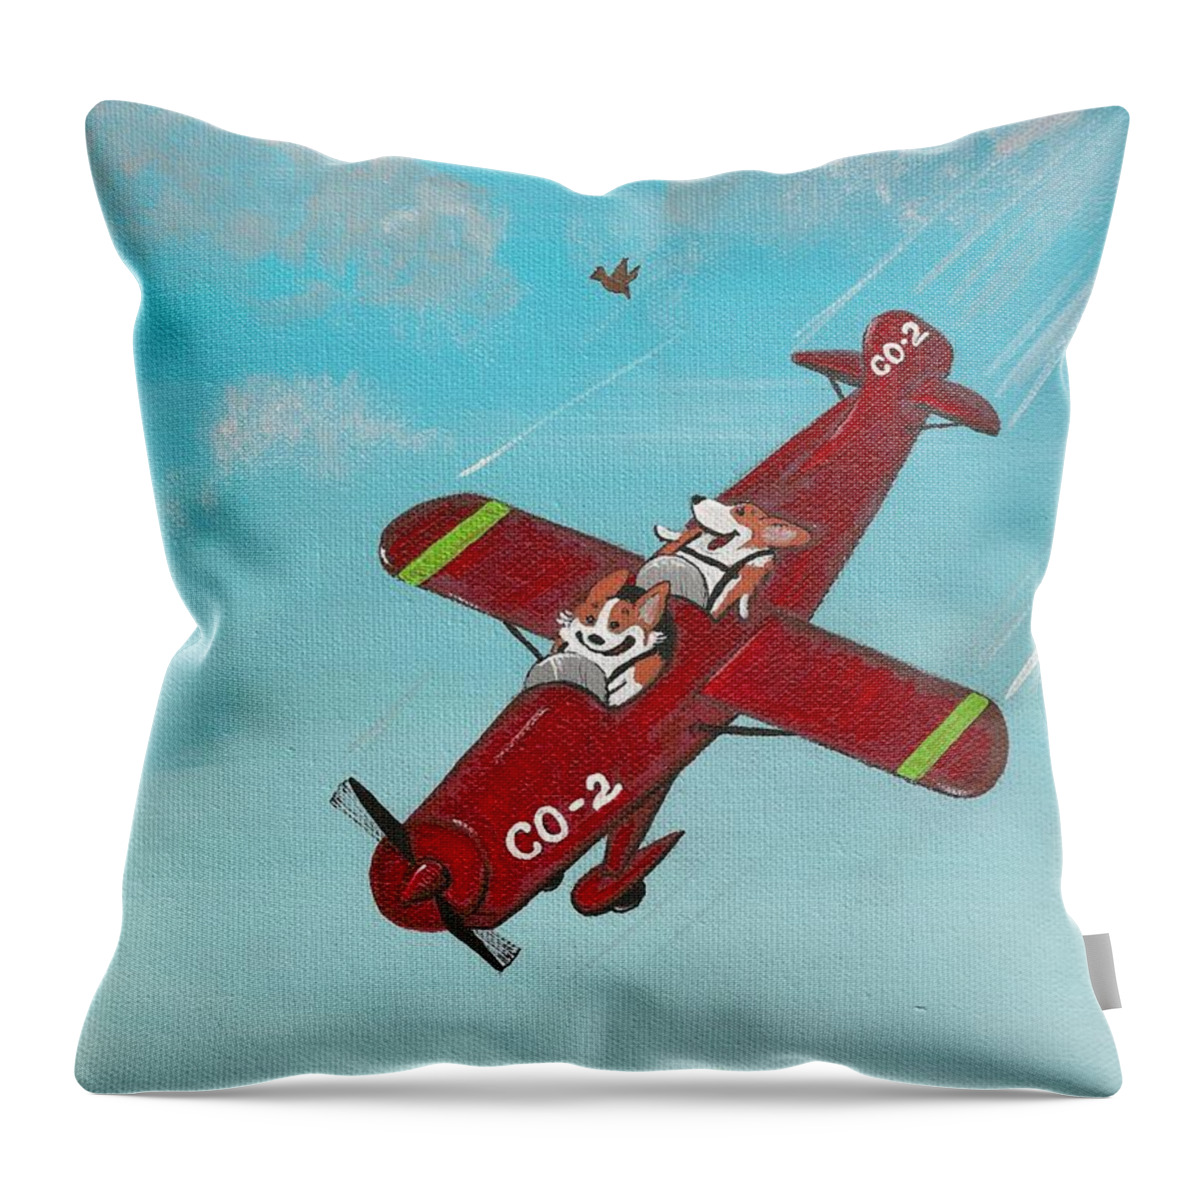 Print Throw Pillow featuring the painting First Take Off by Margaryta Yermolayeva